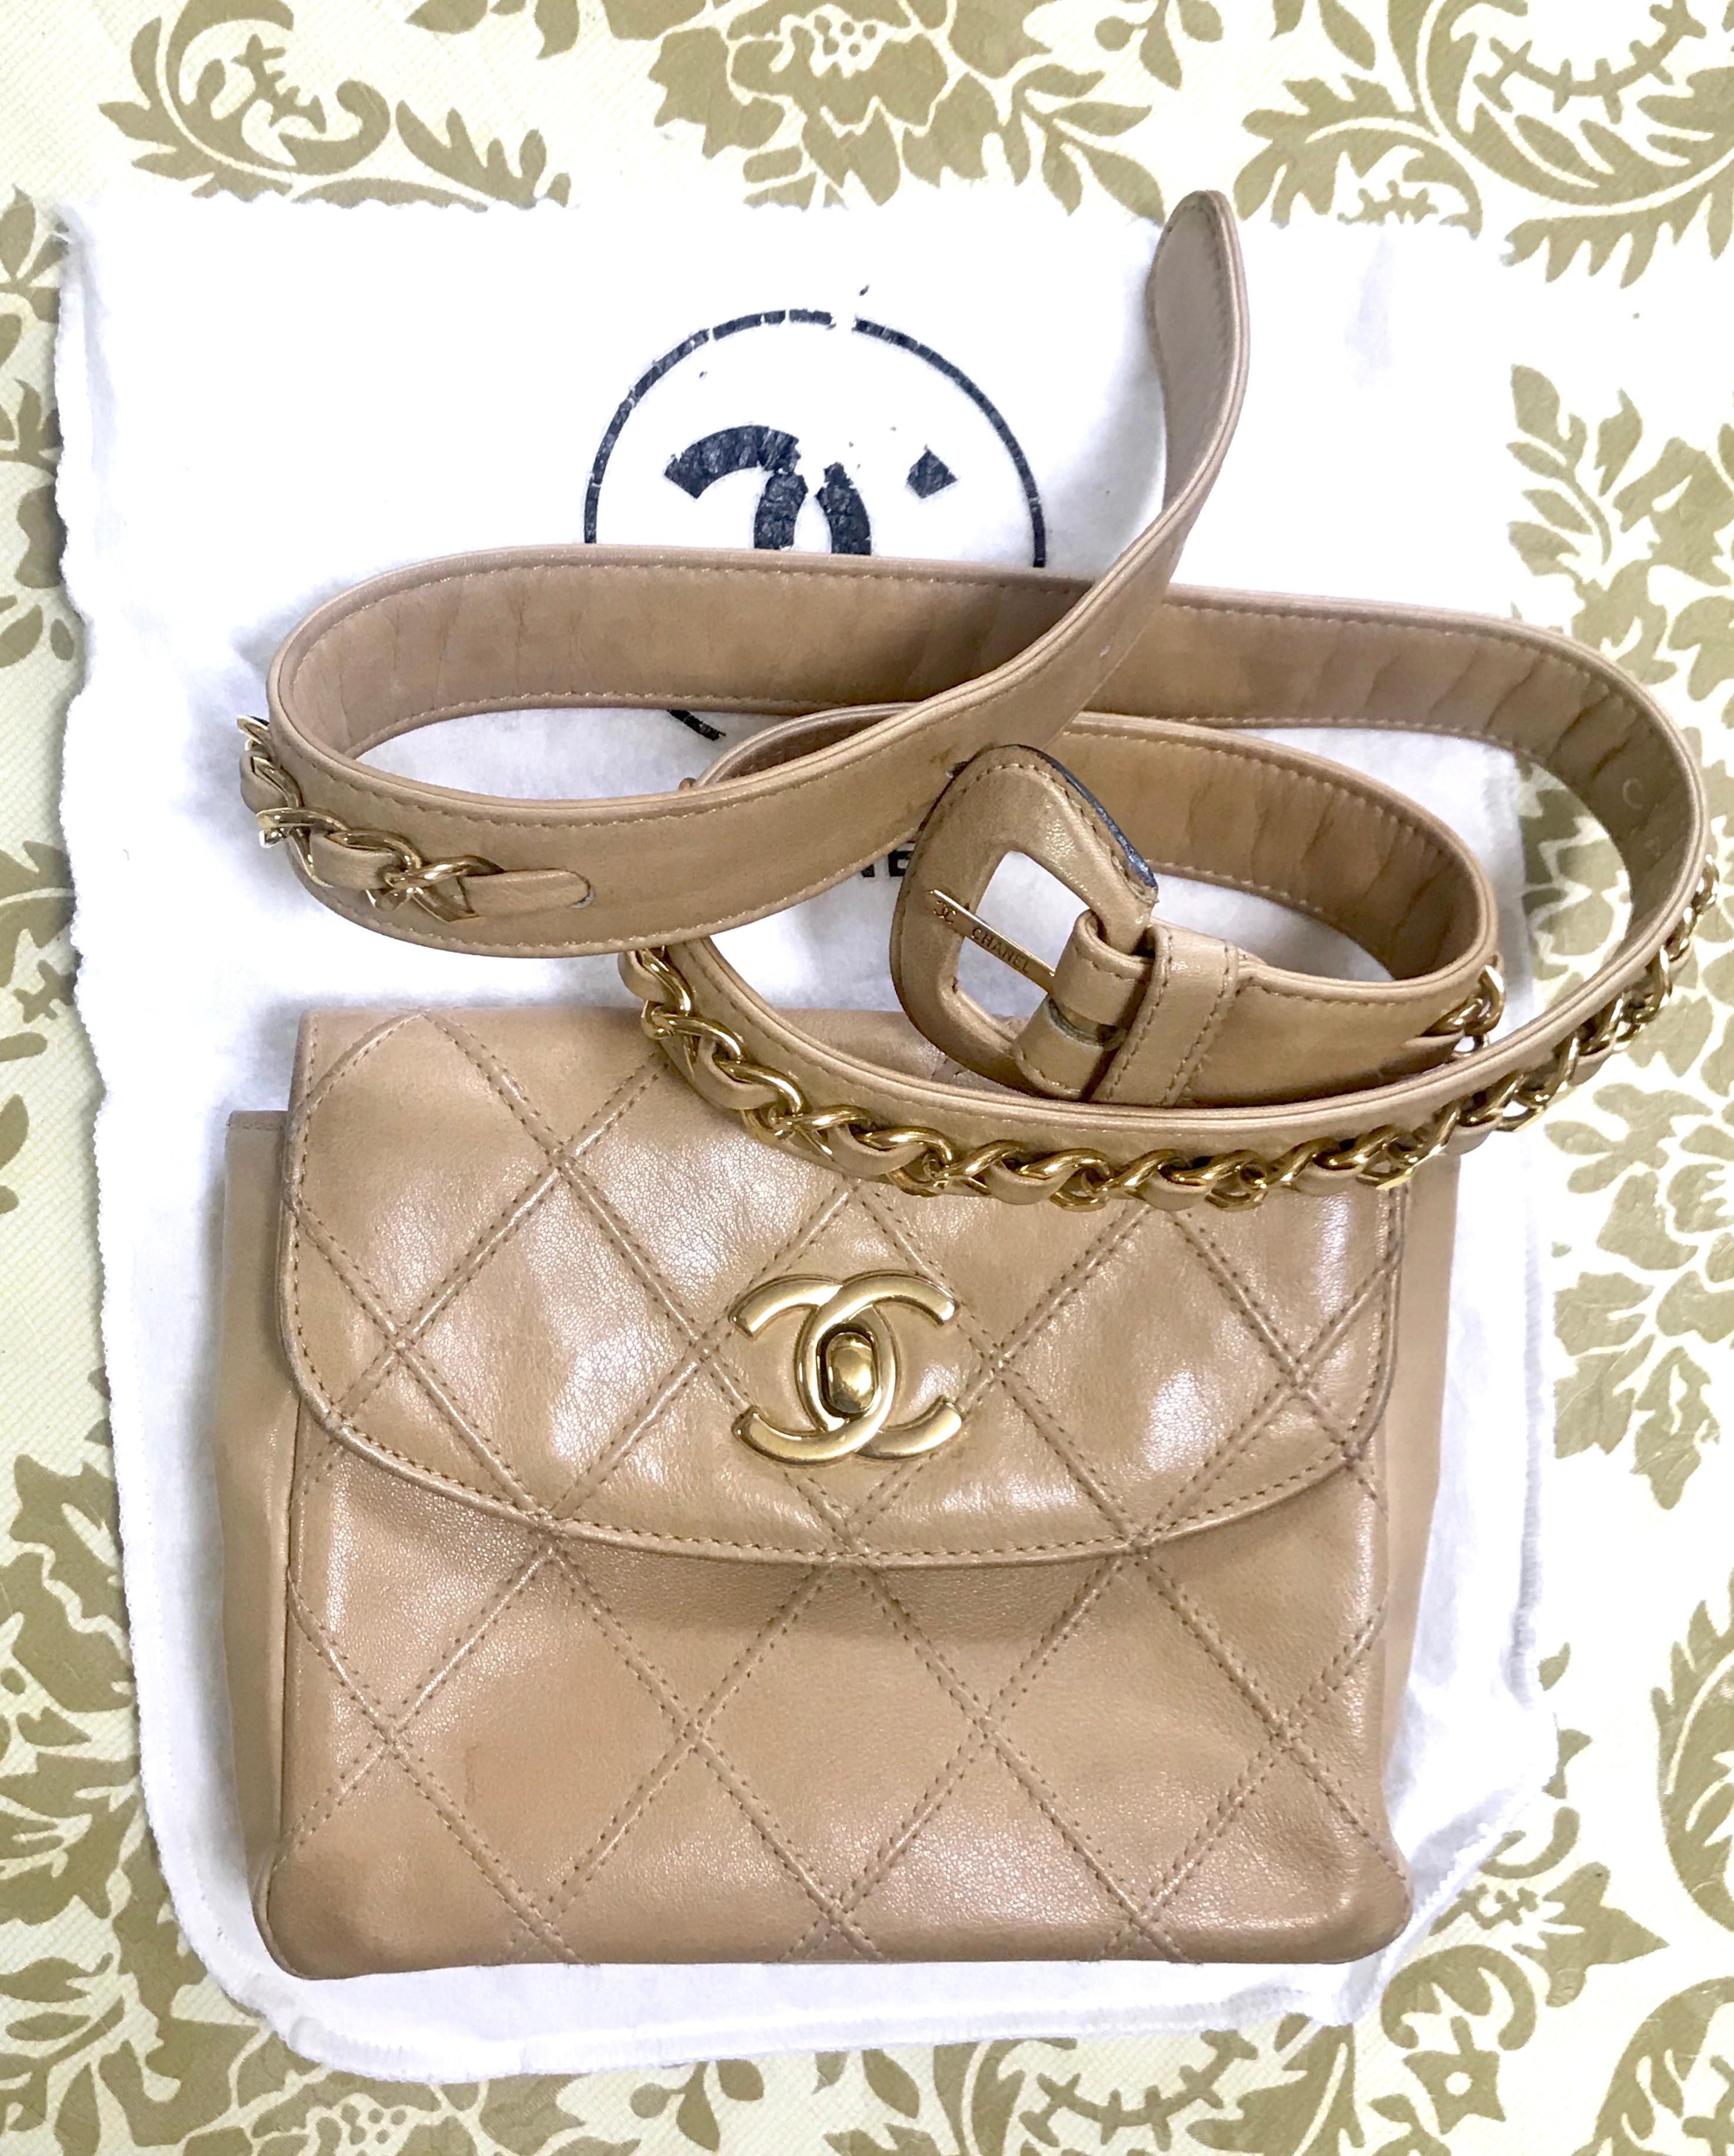 1990s. Vintage CHANEL beige calf leather waist purse, fanny pack, hip bag with gold CC closure and chain belt.  Belt would fit  28.15